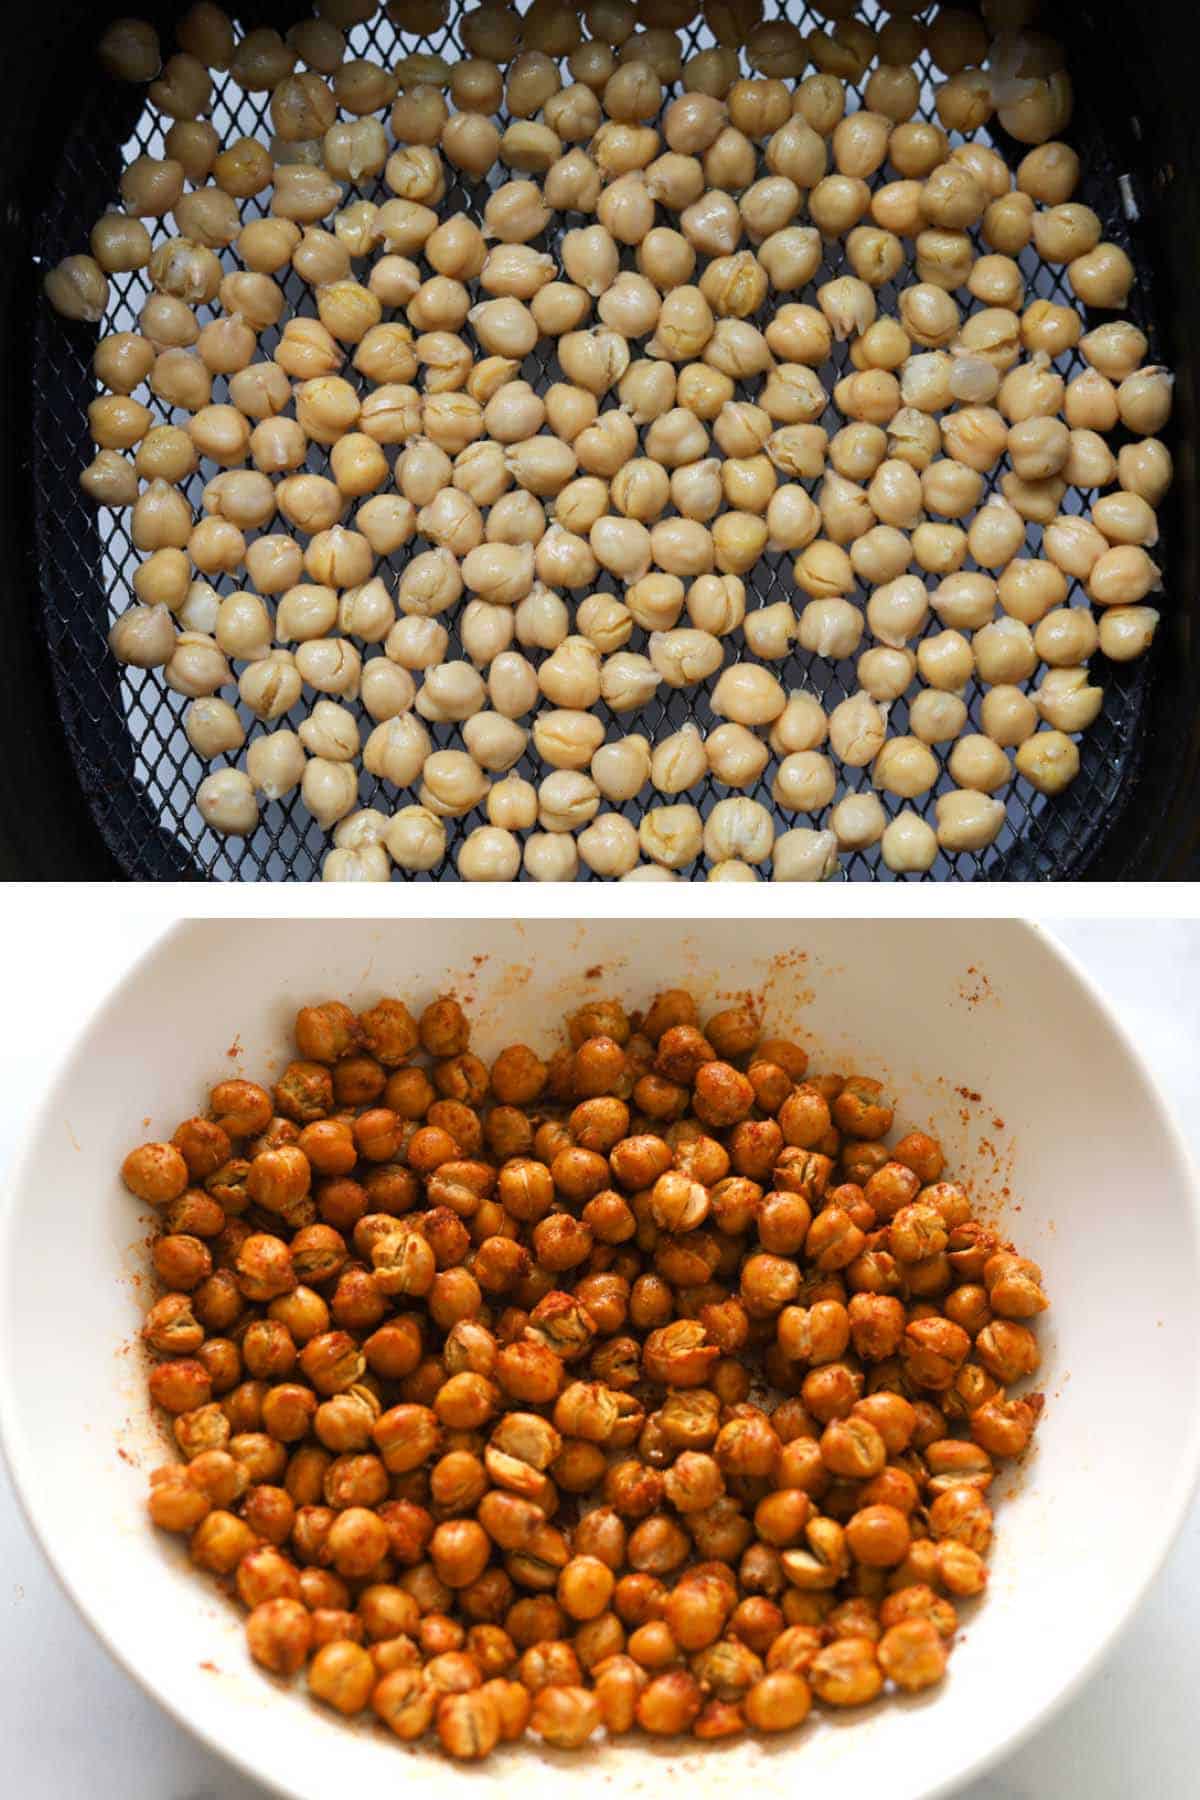 Grid image. Top image of uncooked soaked garbanzo beans in an air fryer basket. Bottom image of cooked beans with seasoning in a bowl.